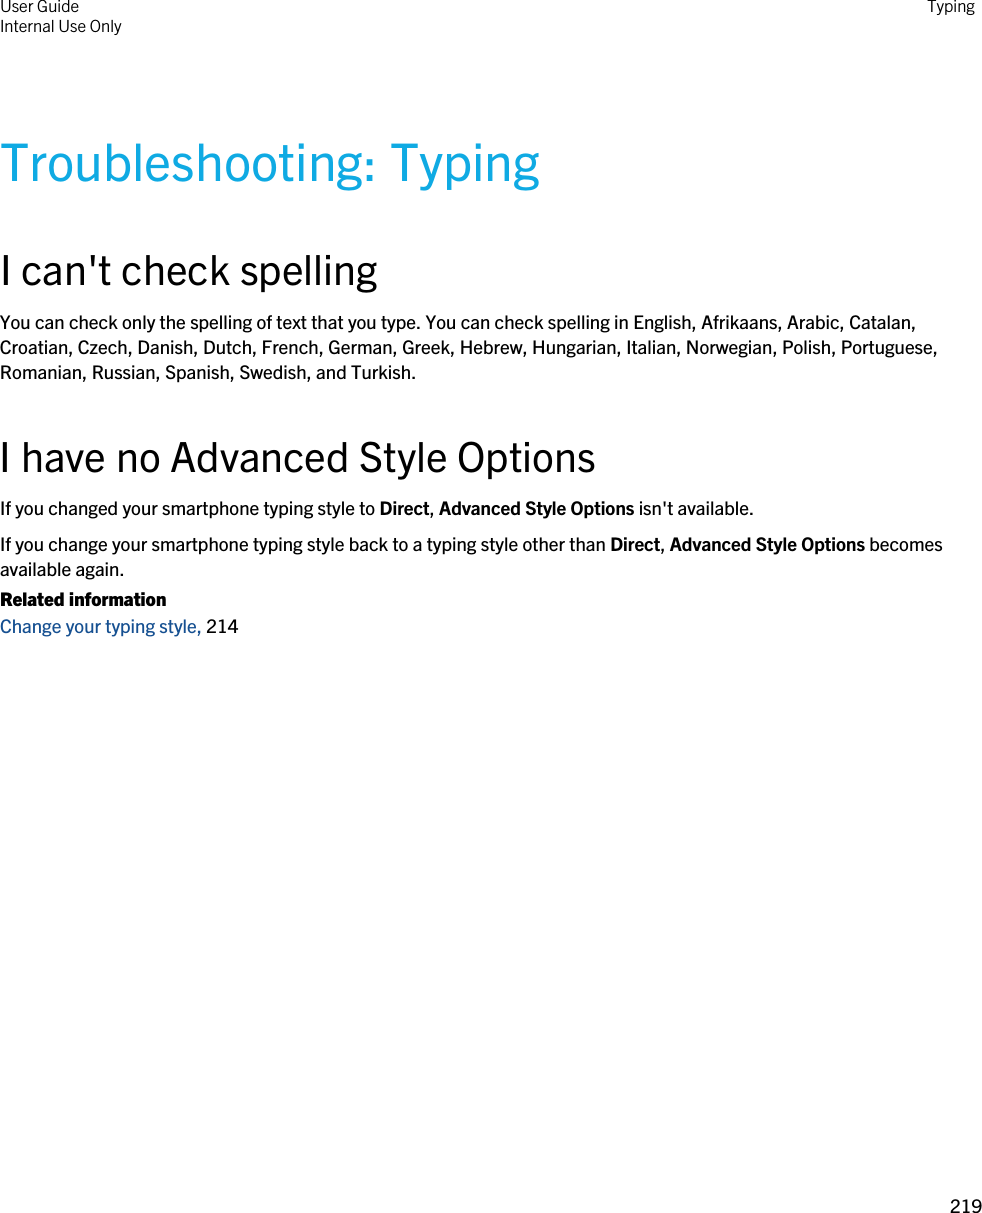 Troubleshooting: TypingI can&apos;t check spellingYou can check only the spelling of text that you type. You can check spelling in English, Afrikaans, Arabic, Catalan, Croatian, Czech, Danish, Dutch, French, German, Greek, Hebrew, Hungarian, Italian, Norwegian, Polish, Portuguese, Romanian, Russian, Spanish, Swedish, and Turkish.I have no Advanced Style OptionsIf you changed your smartphone typing style to Direct, Advanced Style Options isn&apos;t available.If you change your smartphone typing style back to a typing style other than Direct, Advanced Style Options becomes available again.Related informationChange your typing style, 214 User GuideInternal Use Only Typing219 